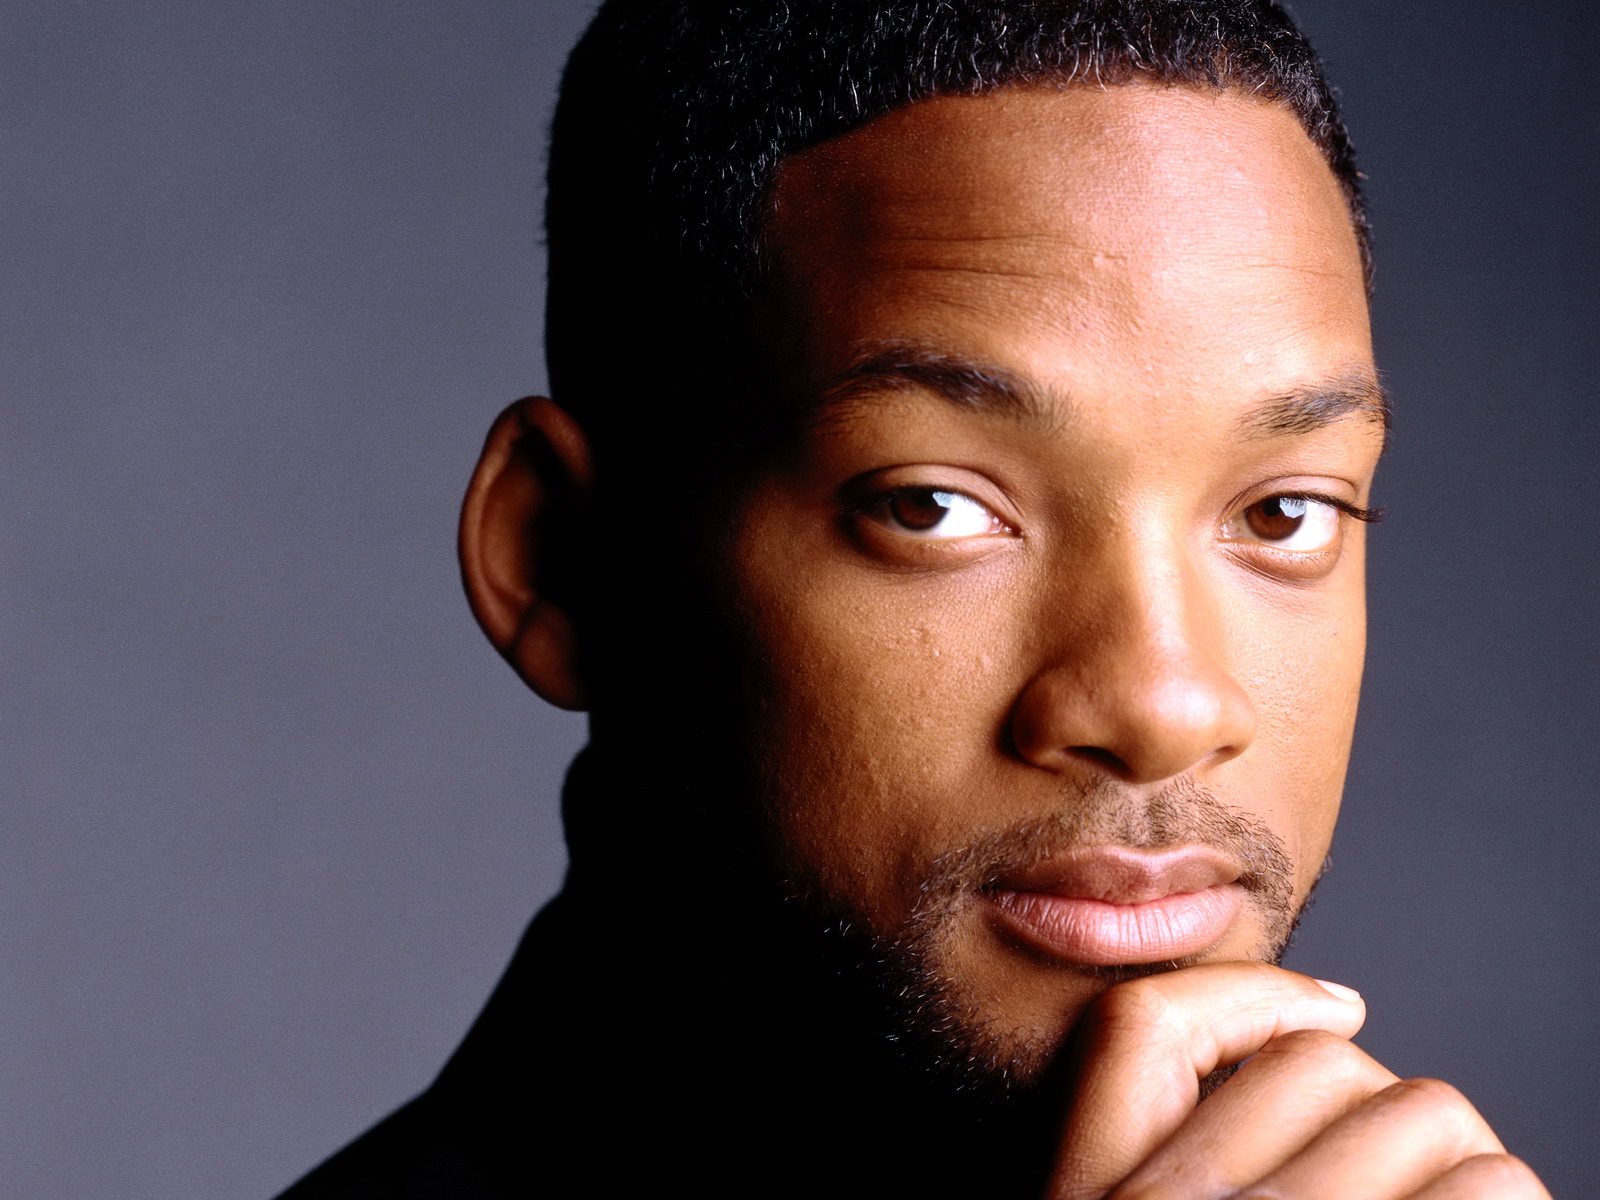 http://www.kinofilms.com.ua/images/wallpapers/1600x1200/19404_Will_Smith.jpg